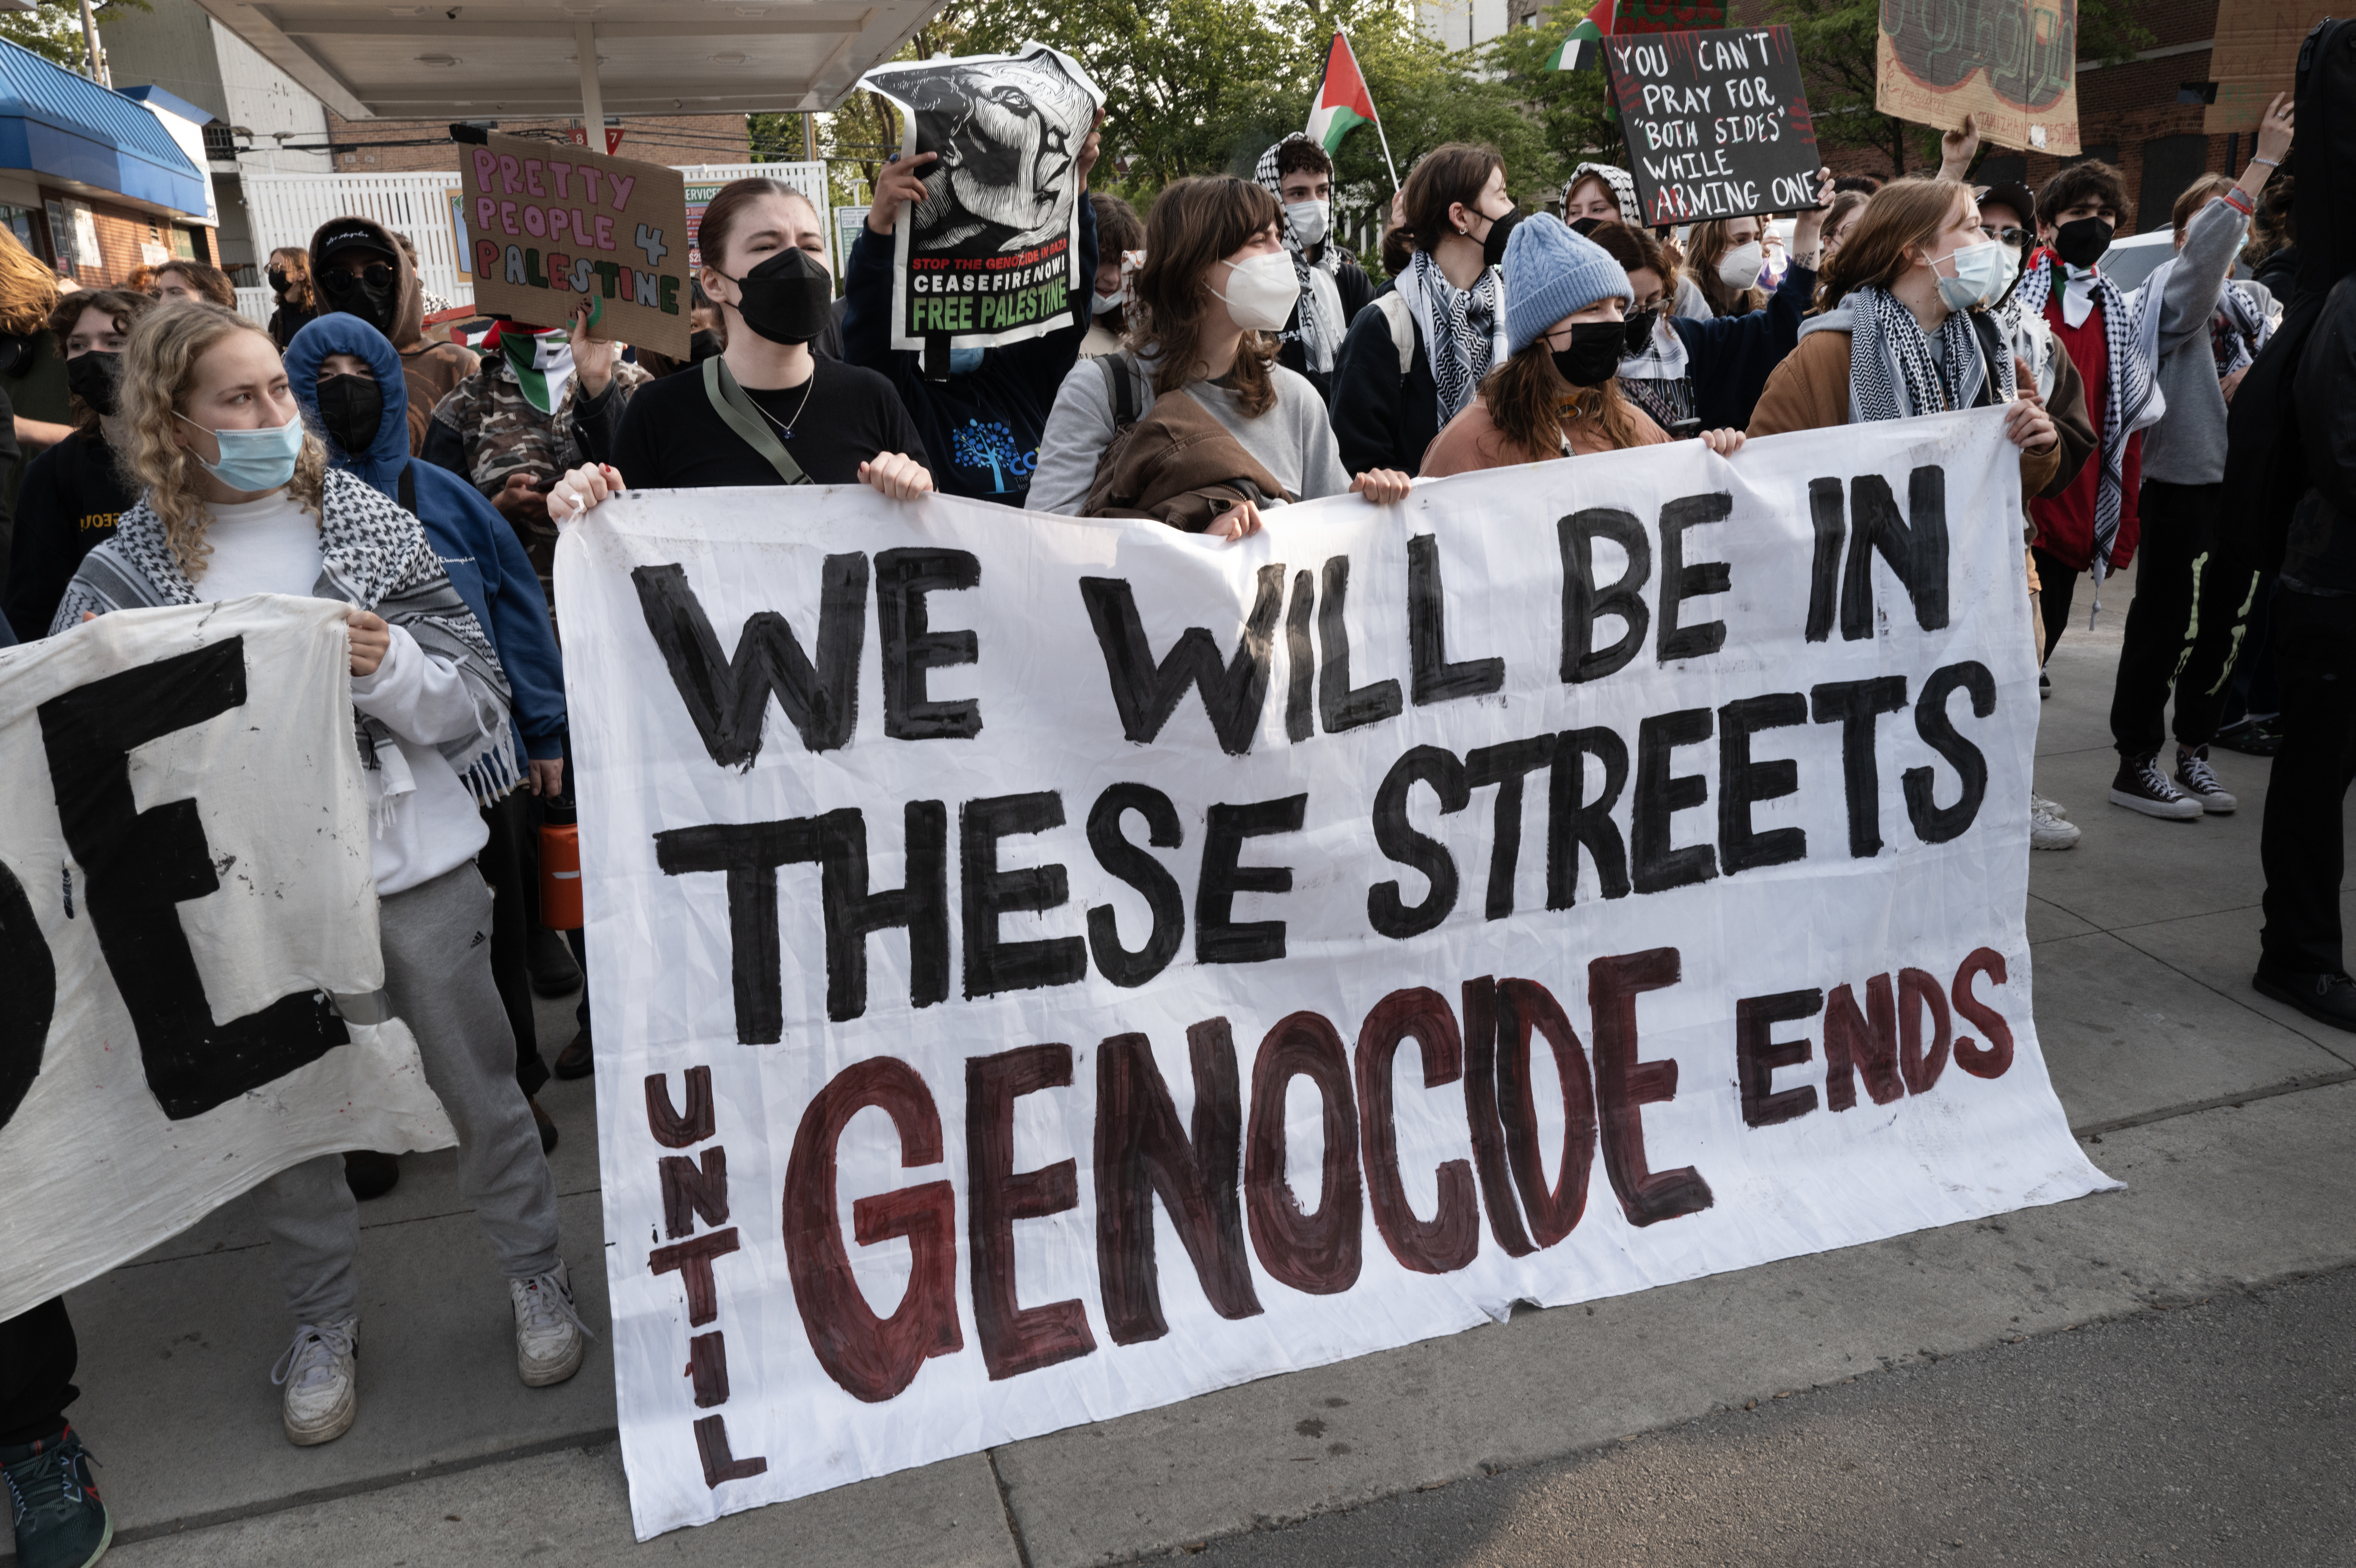 CHICAGO, ILLINOIS - MAY 16: Activist protest across the street from campus while workers and police remove a pro-Palestinian encampment at DePaul University on May 16, 2024 in Chicago, Illinois. The encampment was one of many that popped up on campuses around the country to protest Israel's actions in Gaza. At least two demonstrators were reported detained by police as the camp was being dismantled. (Photo by Scott Olson/Getty Images)